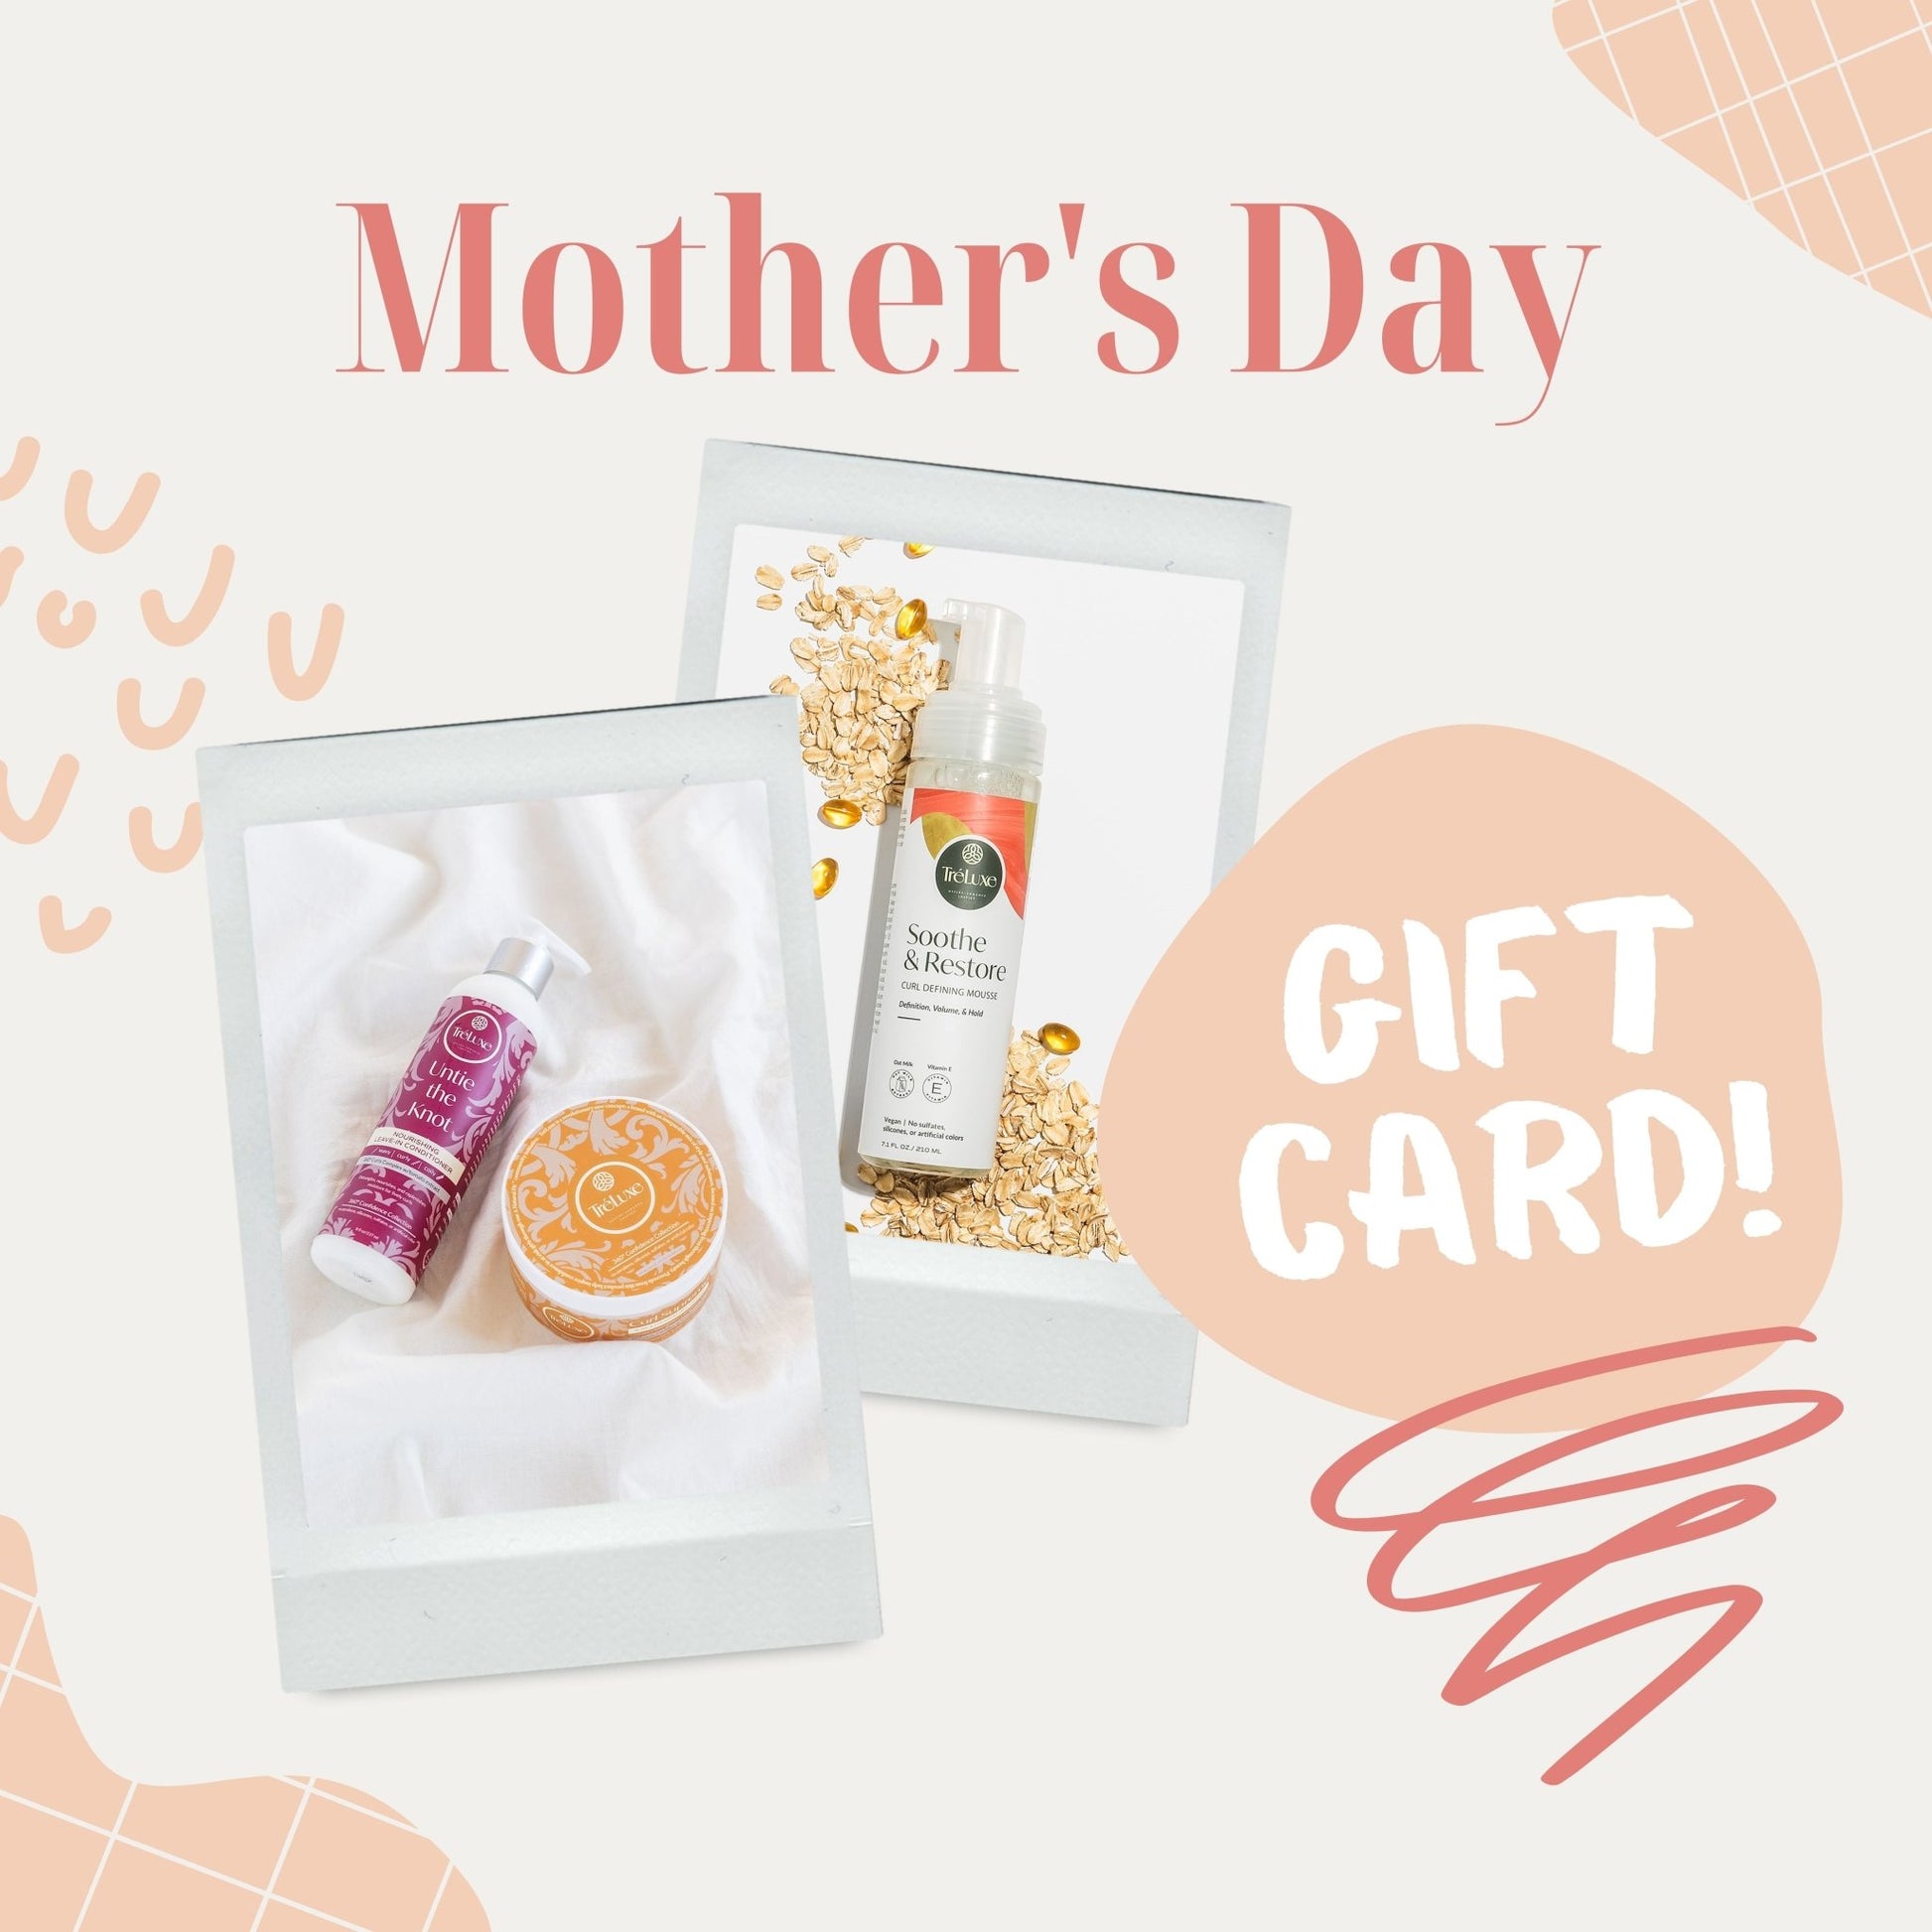 Mother's Day Gift Card - Sunshine Curls